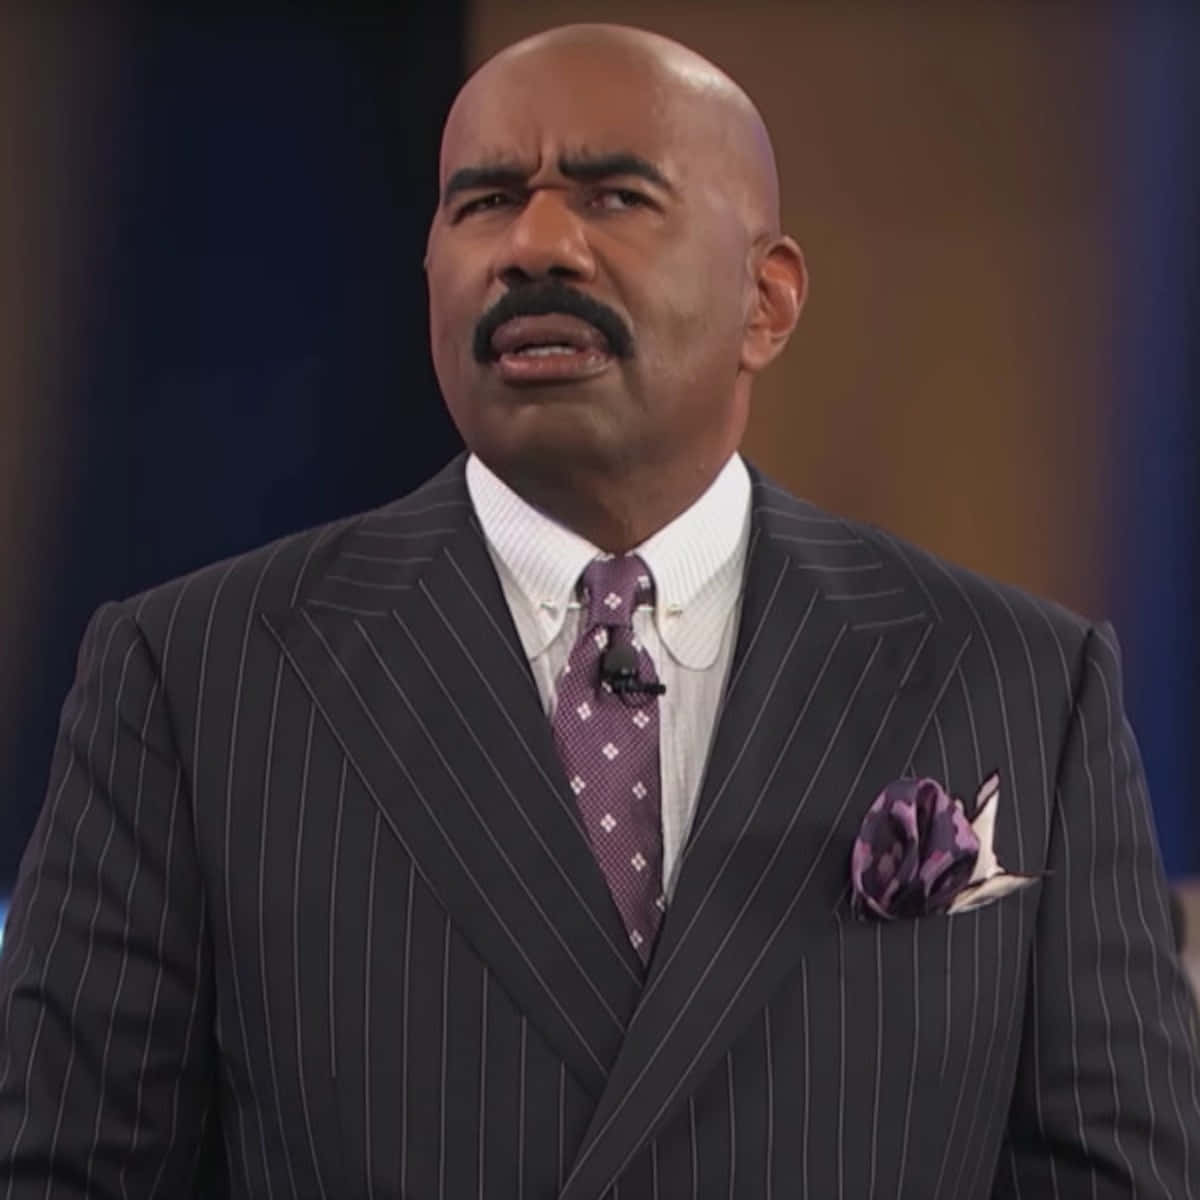 Comedian And Tv Host Steve Harvey With A Surprised Expression. Wallpaper